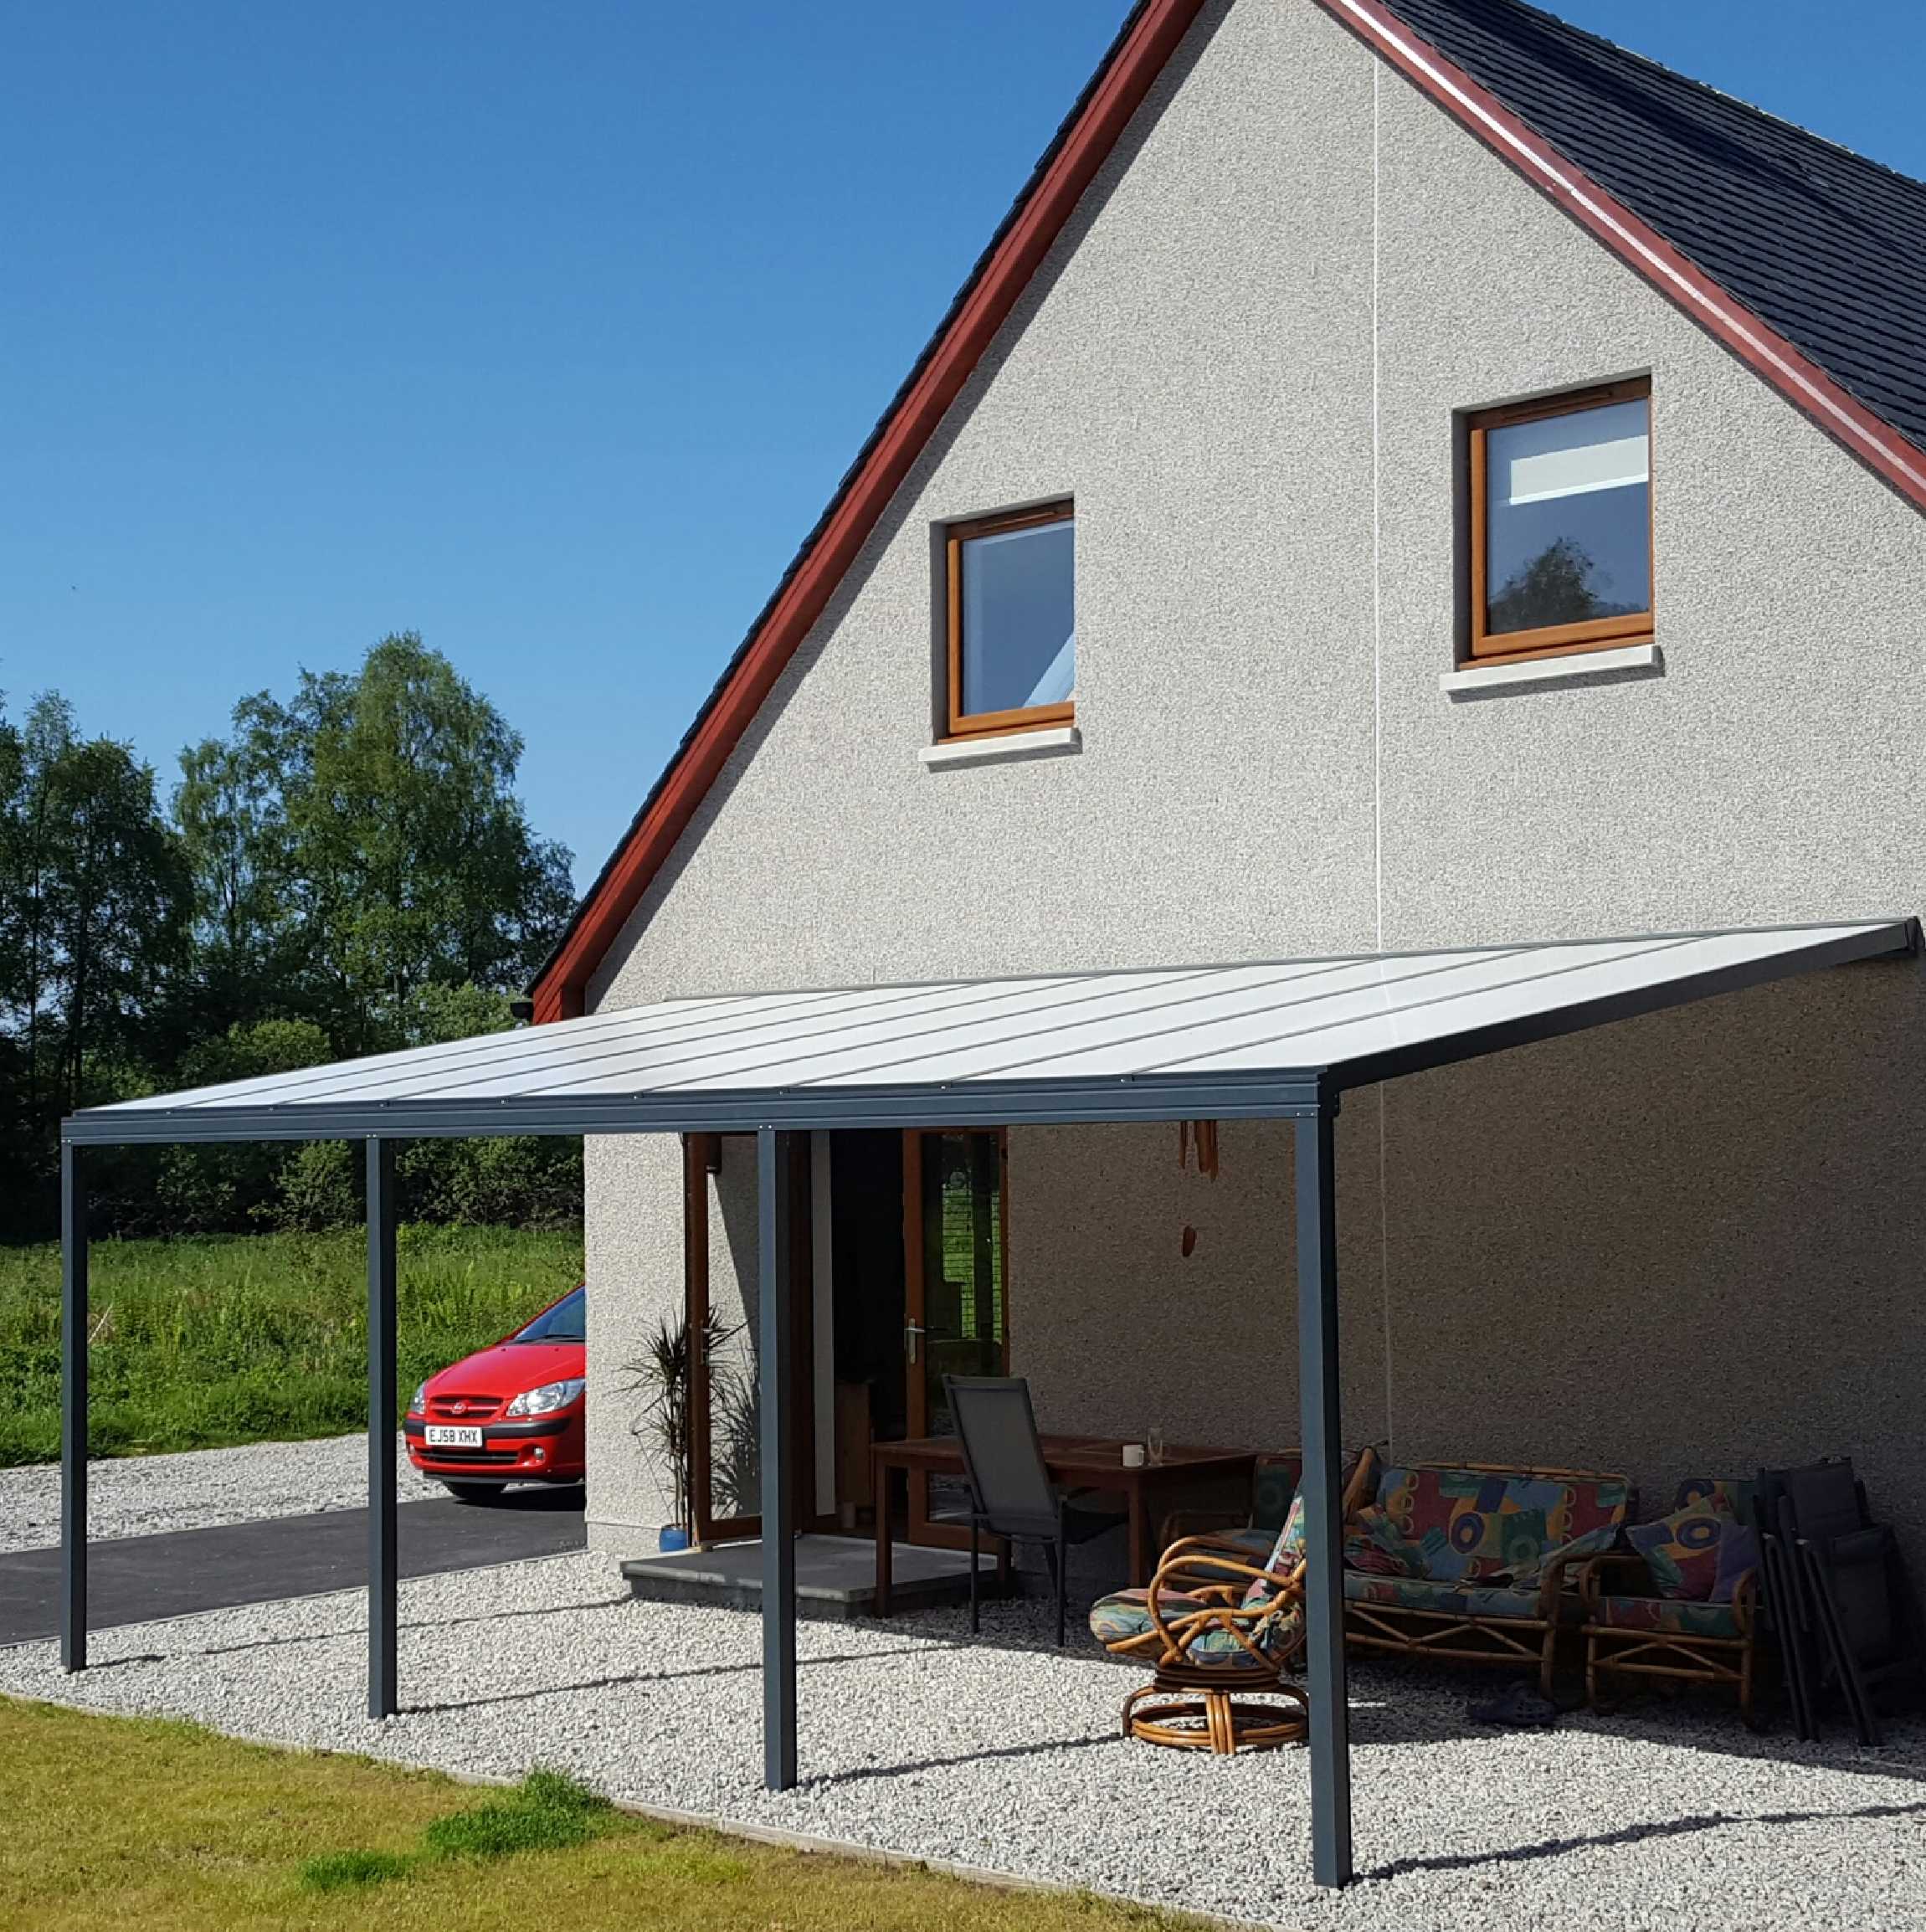 Wall-Mounted Lean-To Canopy in Anthracite Grey, Glazed ...